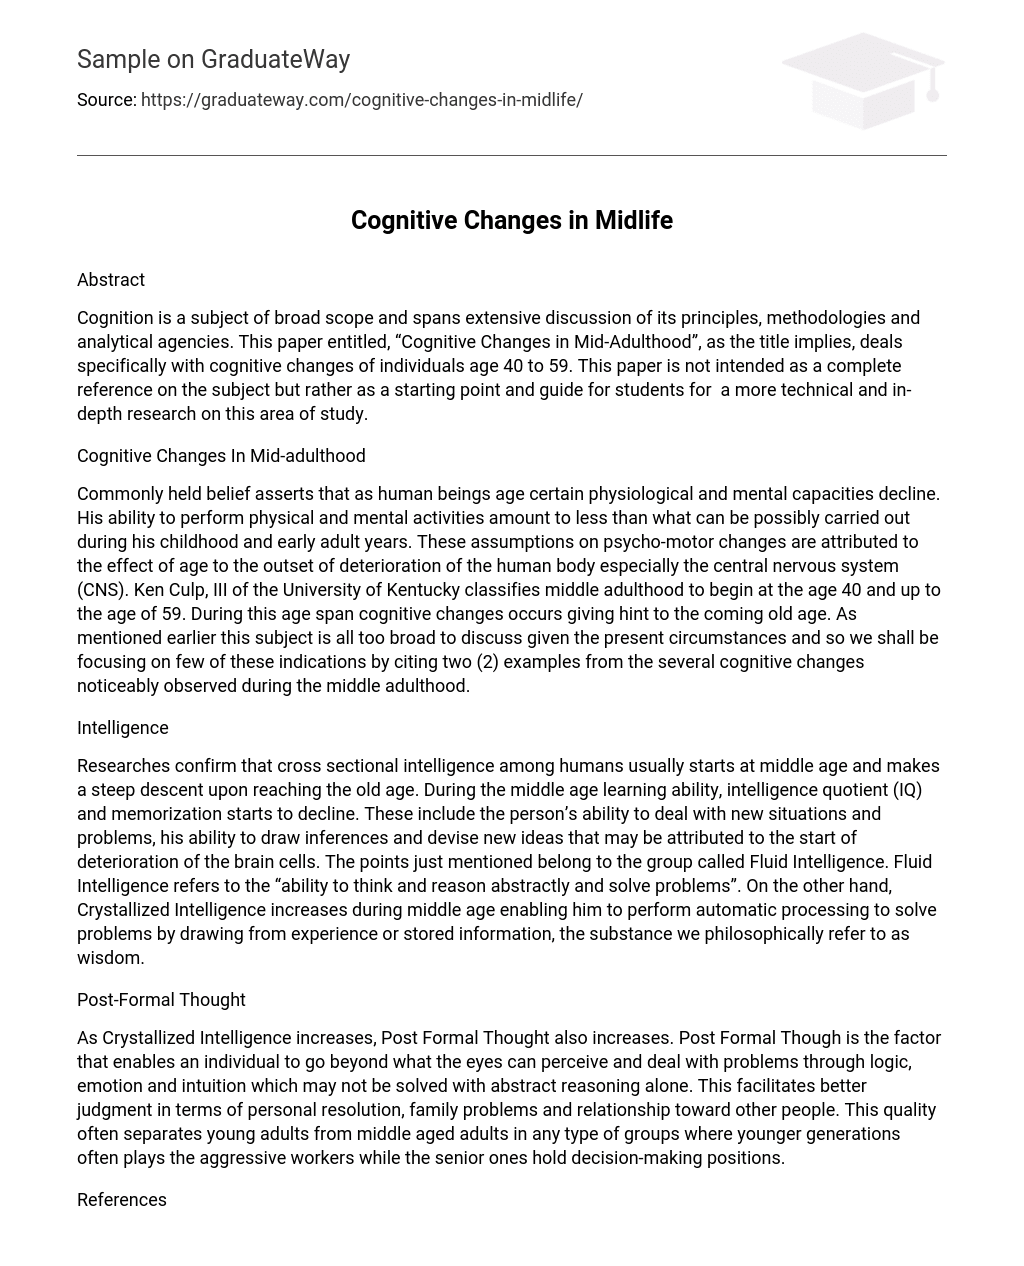 Cognitive Changes in Midlife